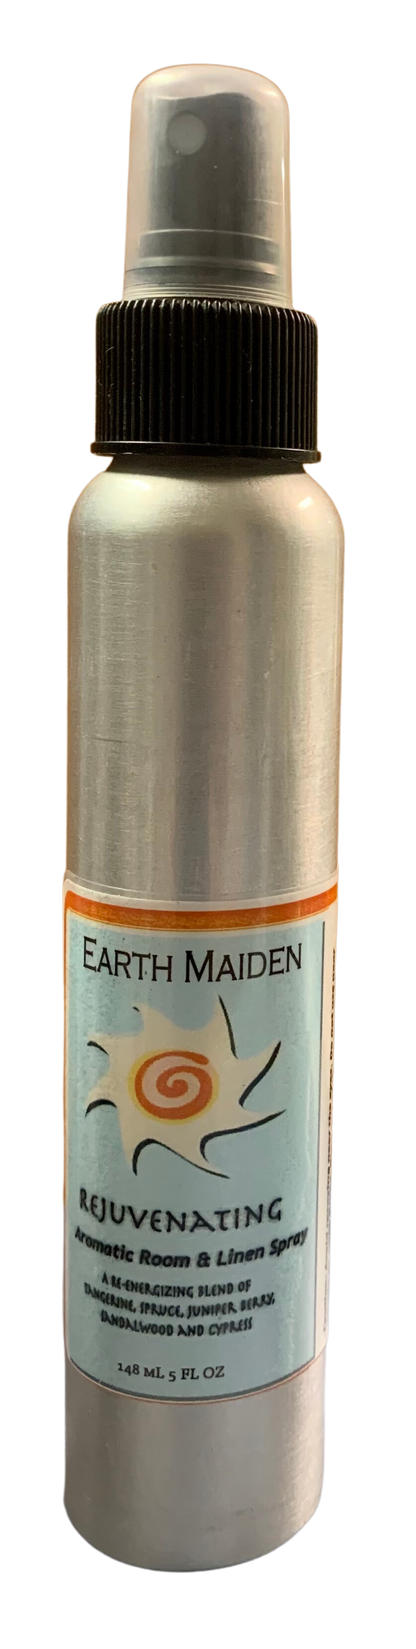 All Natural “Rejuvenating” Aroma Mist with Tangerine, Spruce, Juniper Berry, Sandalwood, Cypress Essential Oils in 5-ounce metal bullet container with fine mist sprayer.